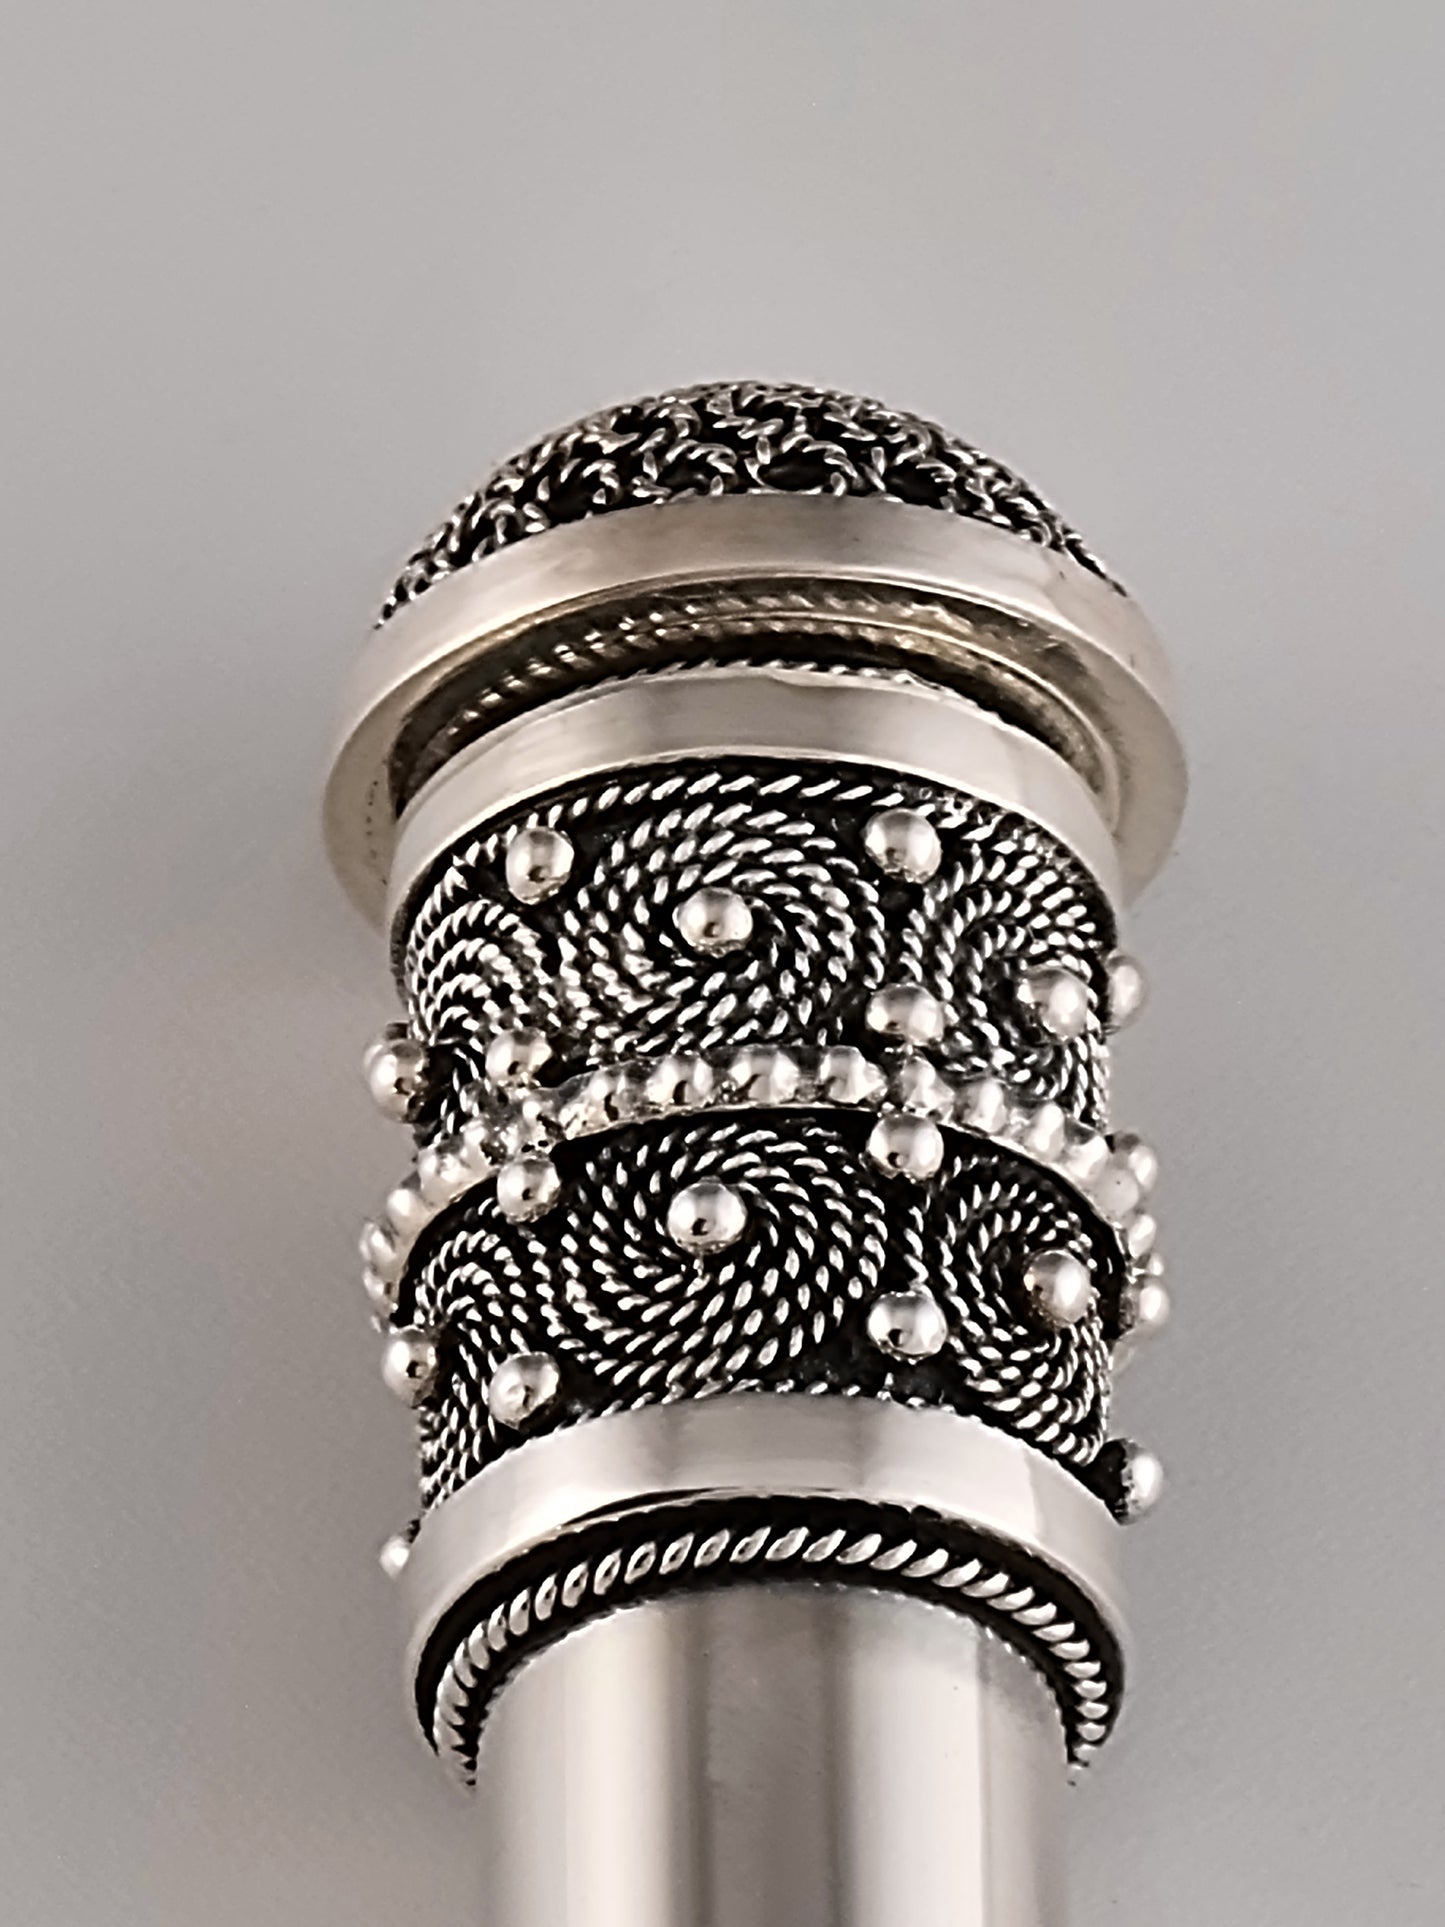 Intricate filigree elements at the top of this round silver Mezuzah